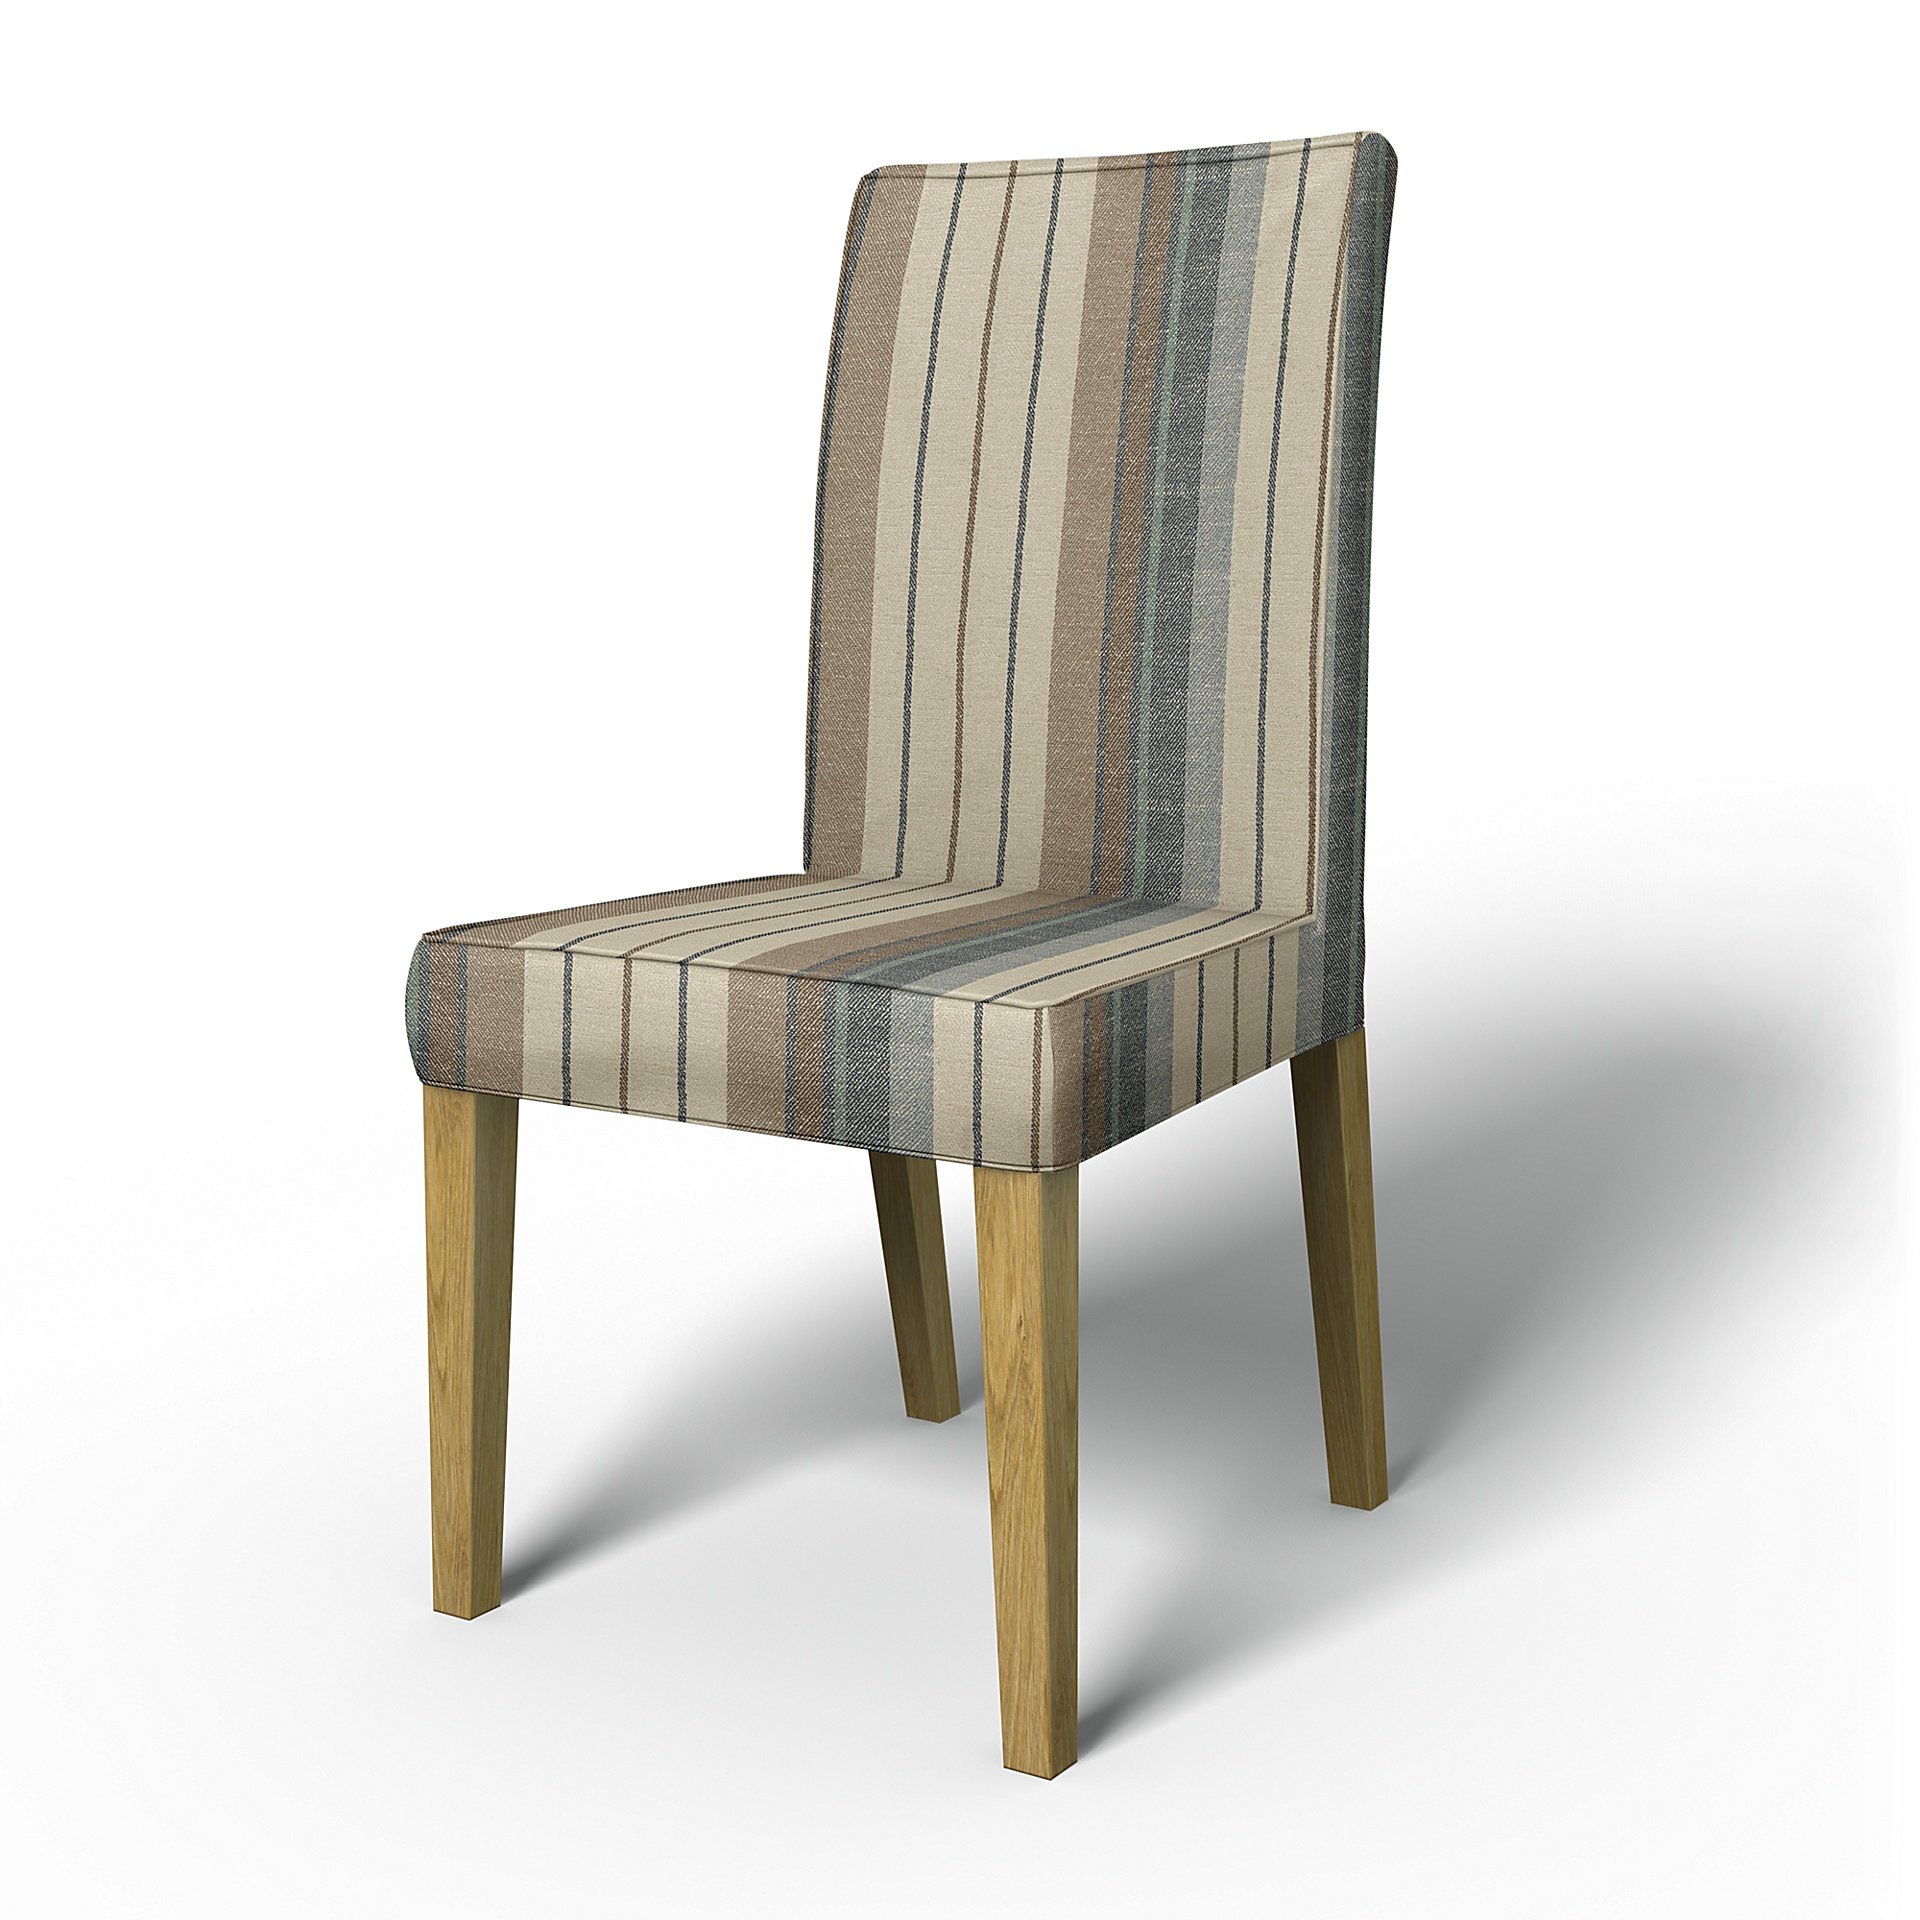 IKEA - Henriksdal Dining Chair Cover with piping (Standard model), Soft Oak, Cotton - Bemz